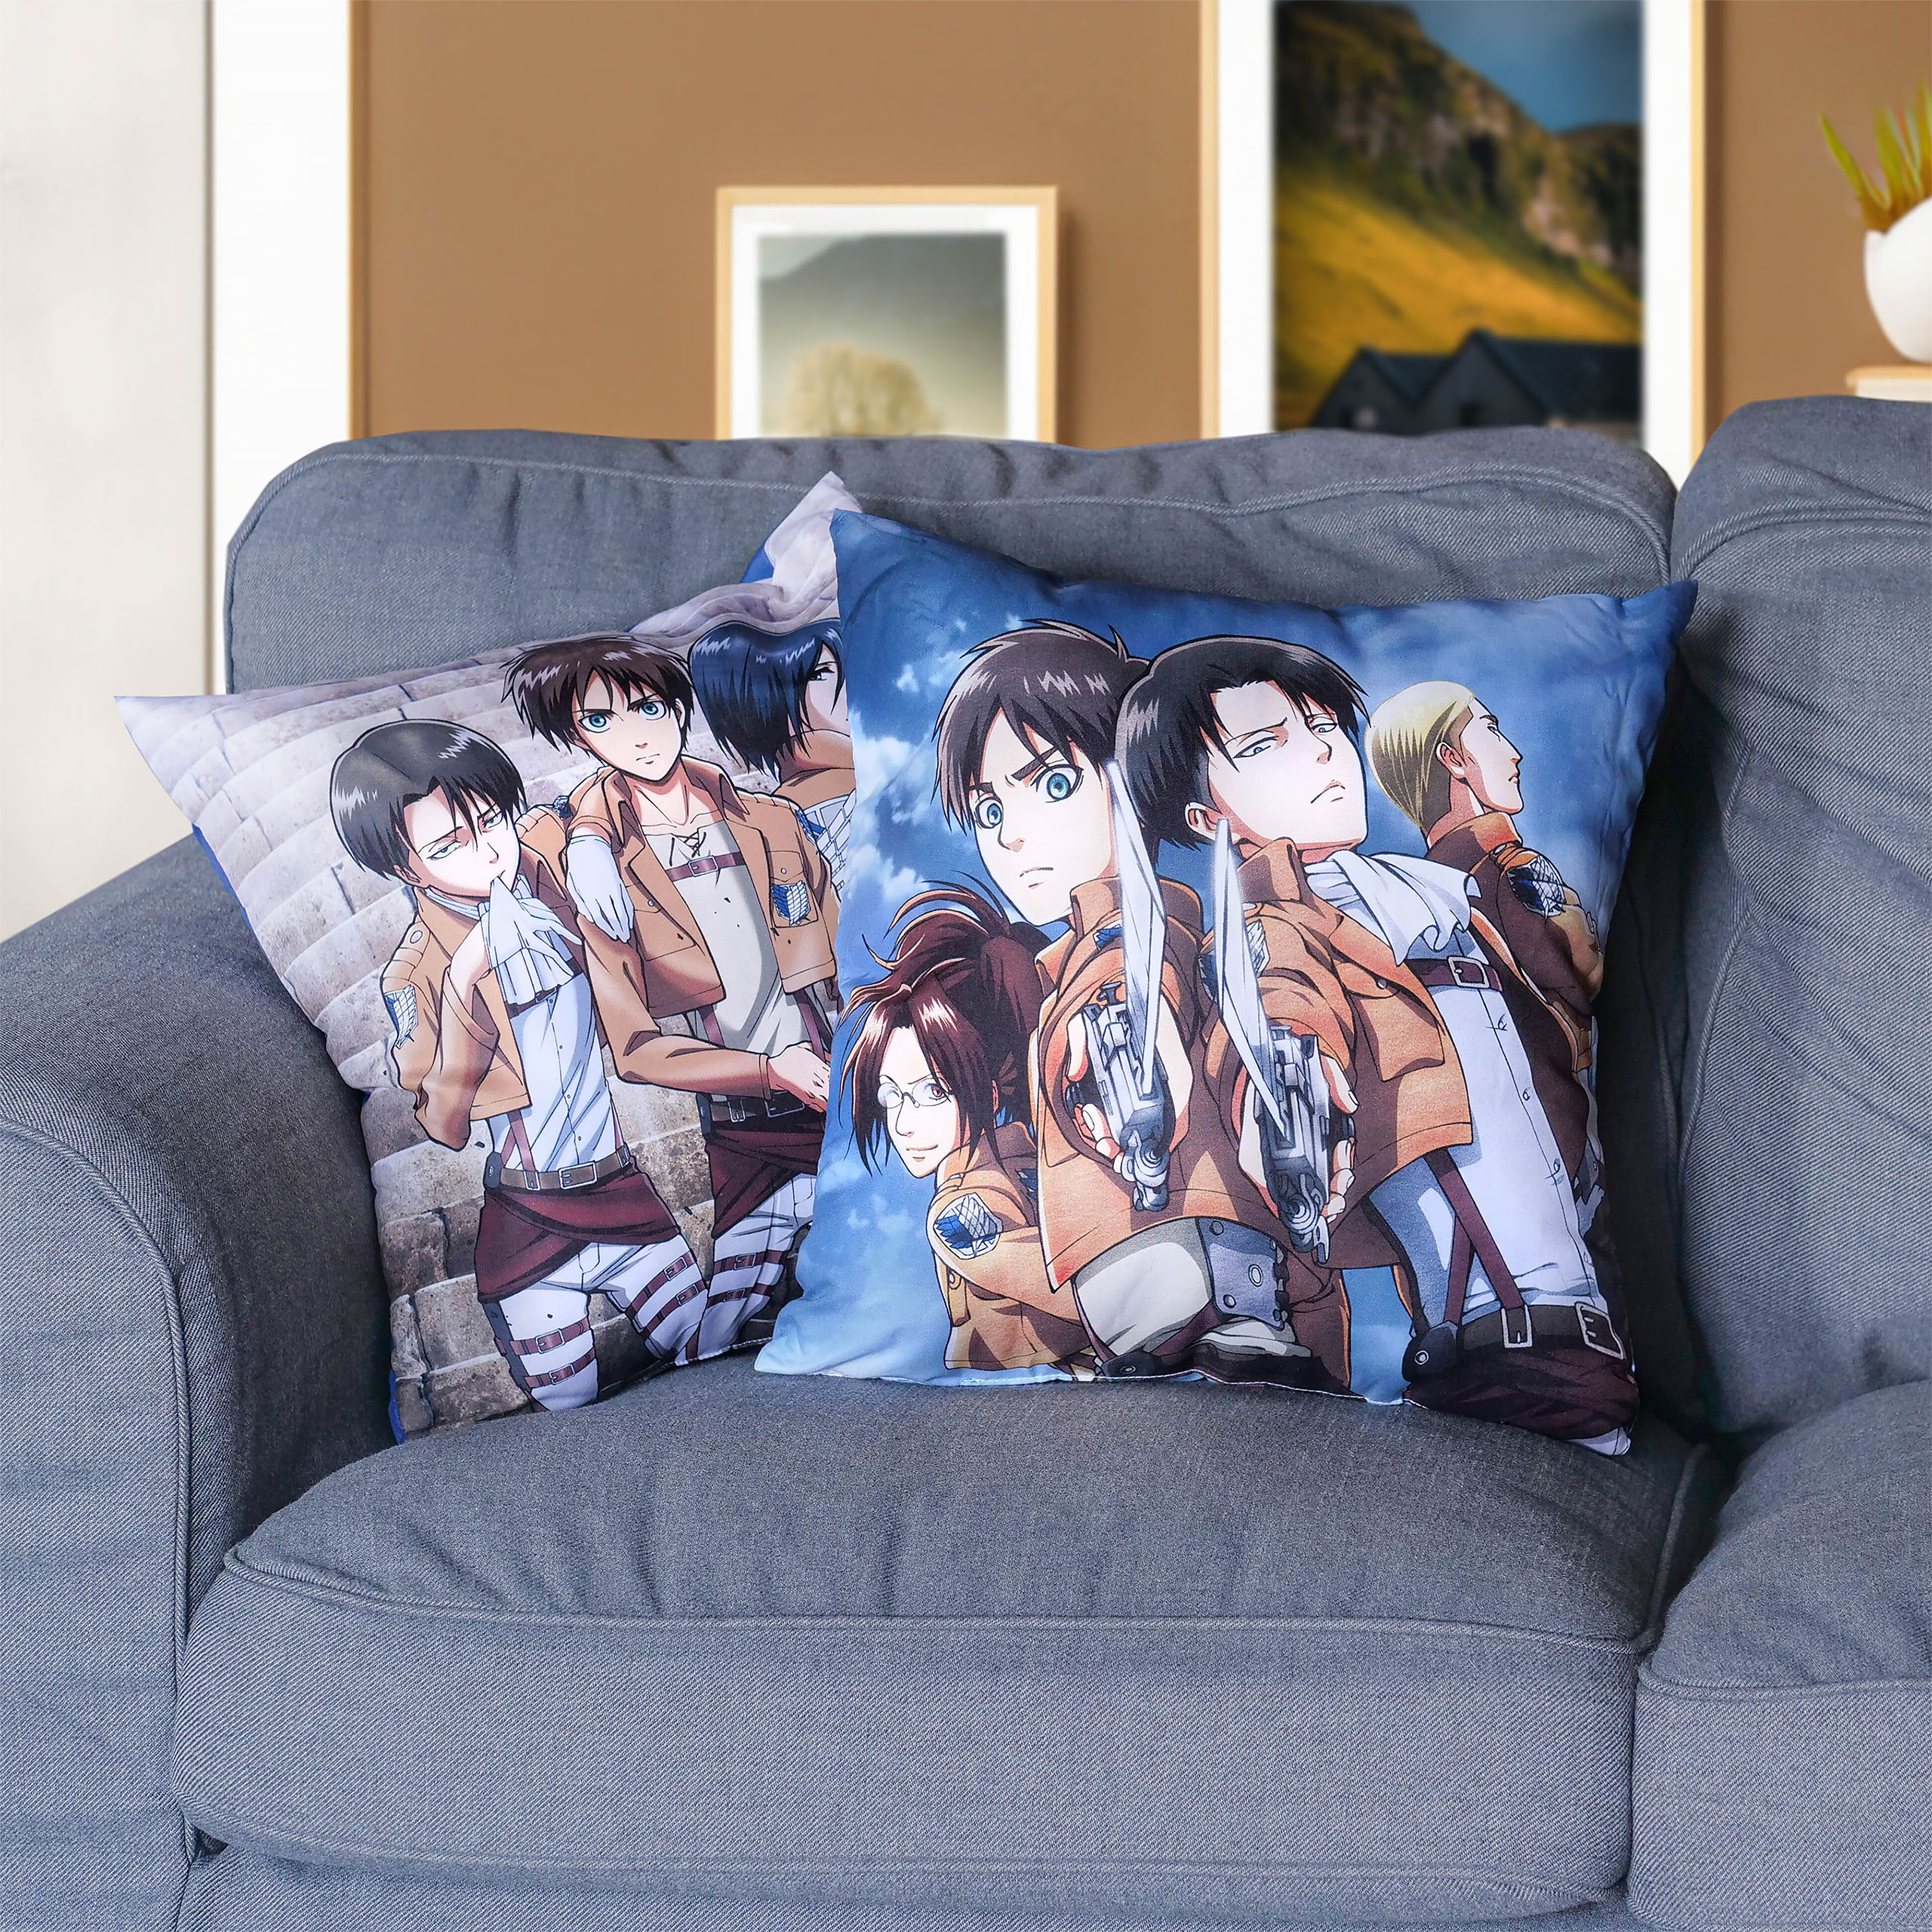 Attack on Titan - Group Pillow